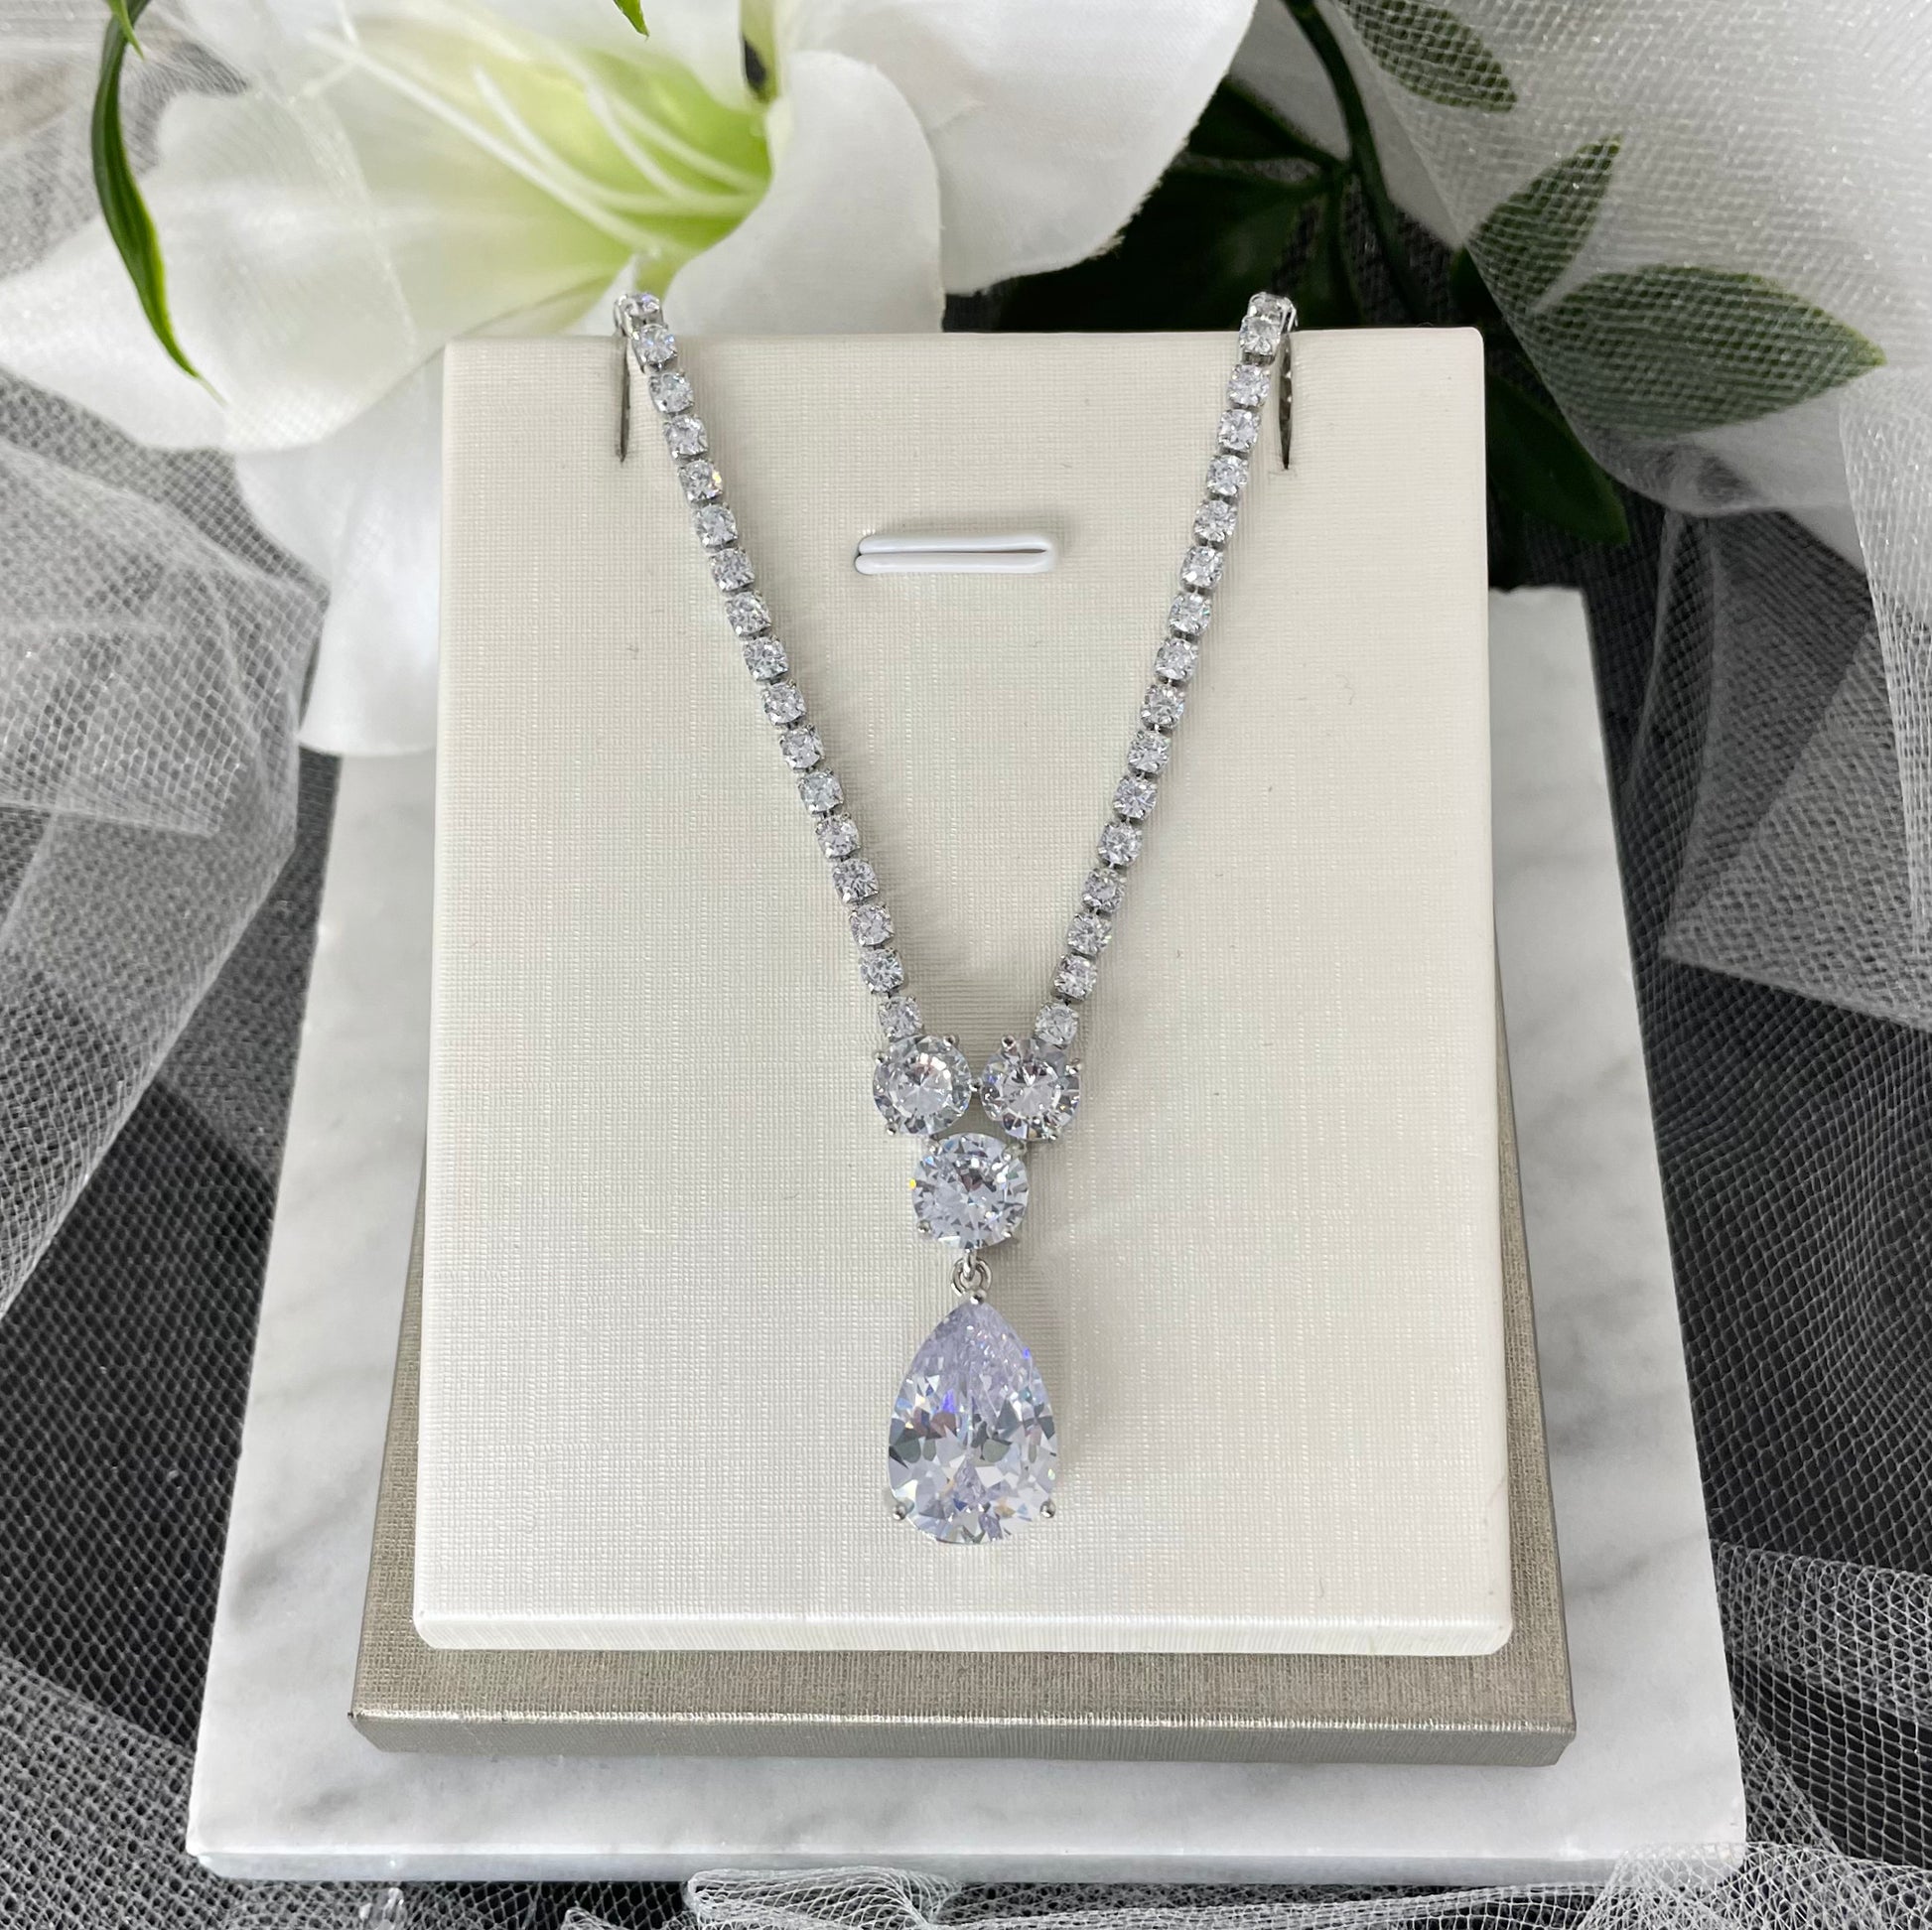 Dayna Diamanté Bridal Wedding Necklace:  "Close-up of the Dayna Diamanté Bridal Wedding Necklace, featuring a delicate chain adorned with round Diamontes and a sparkling centerpiece consisting of three large Diamantés and a teardrop pendant."